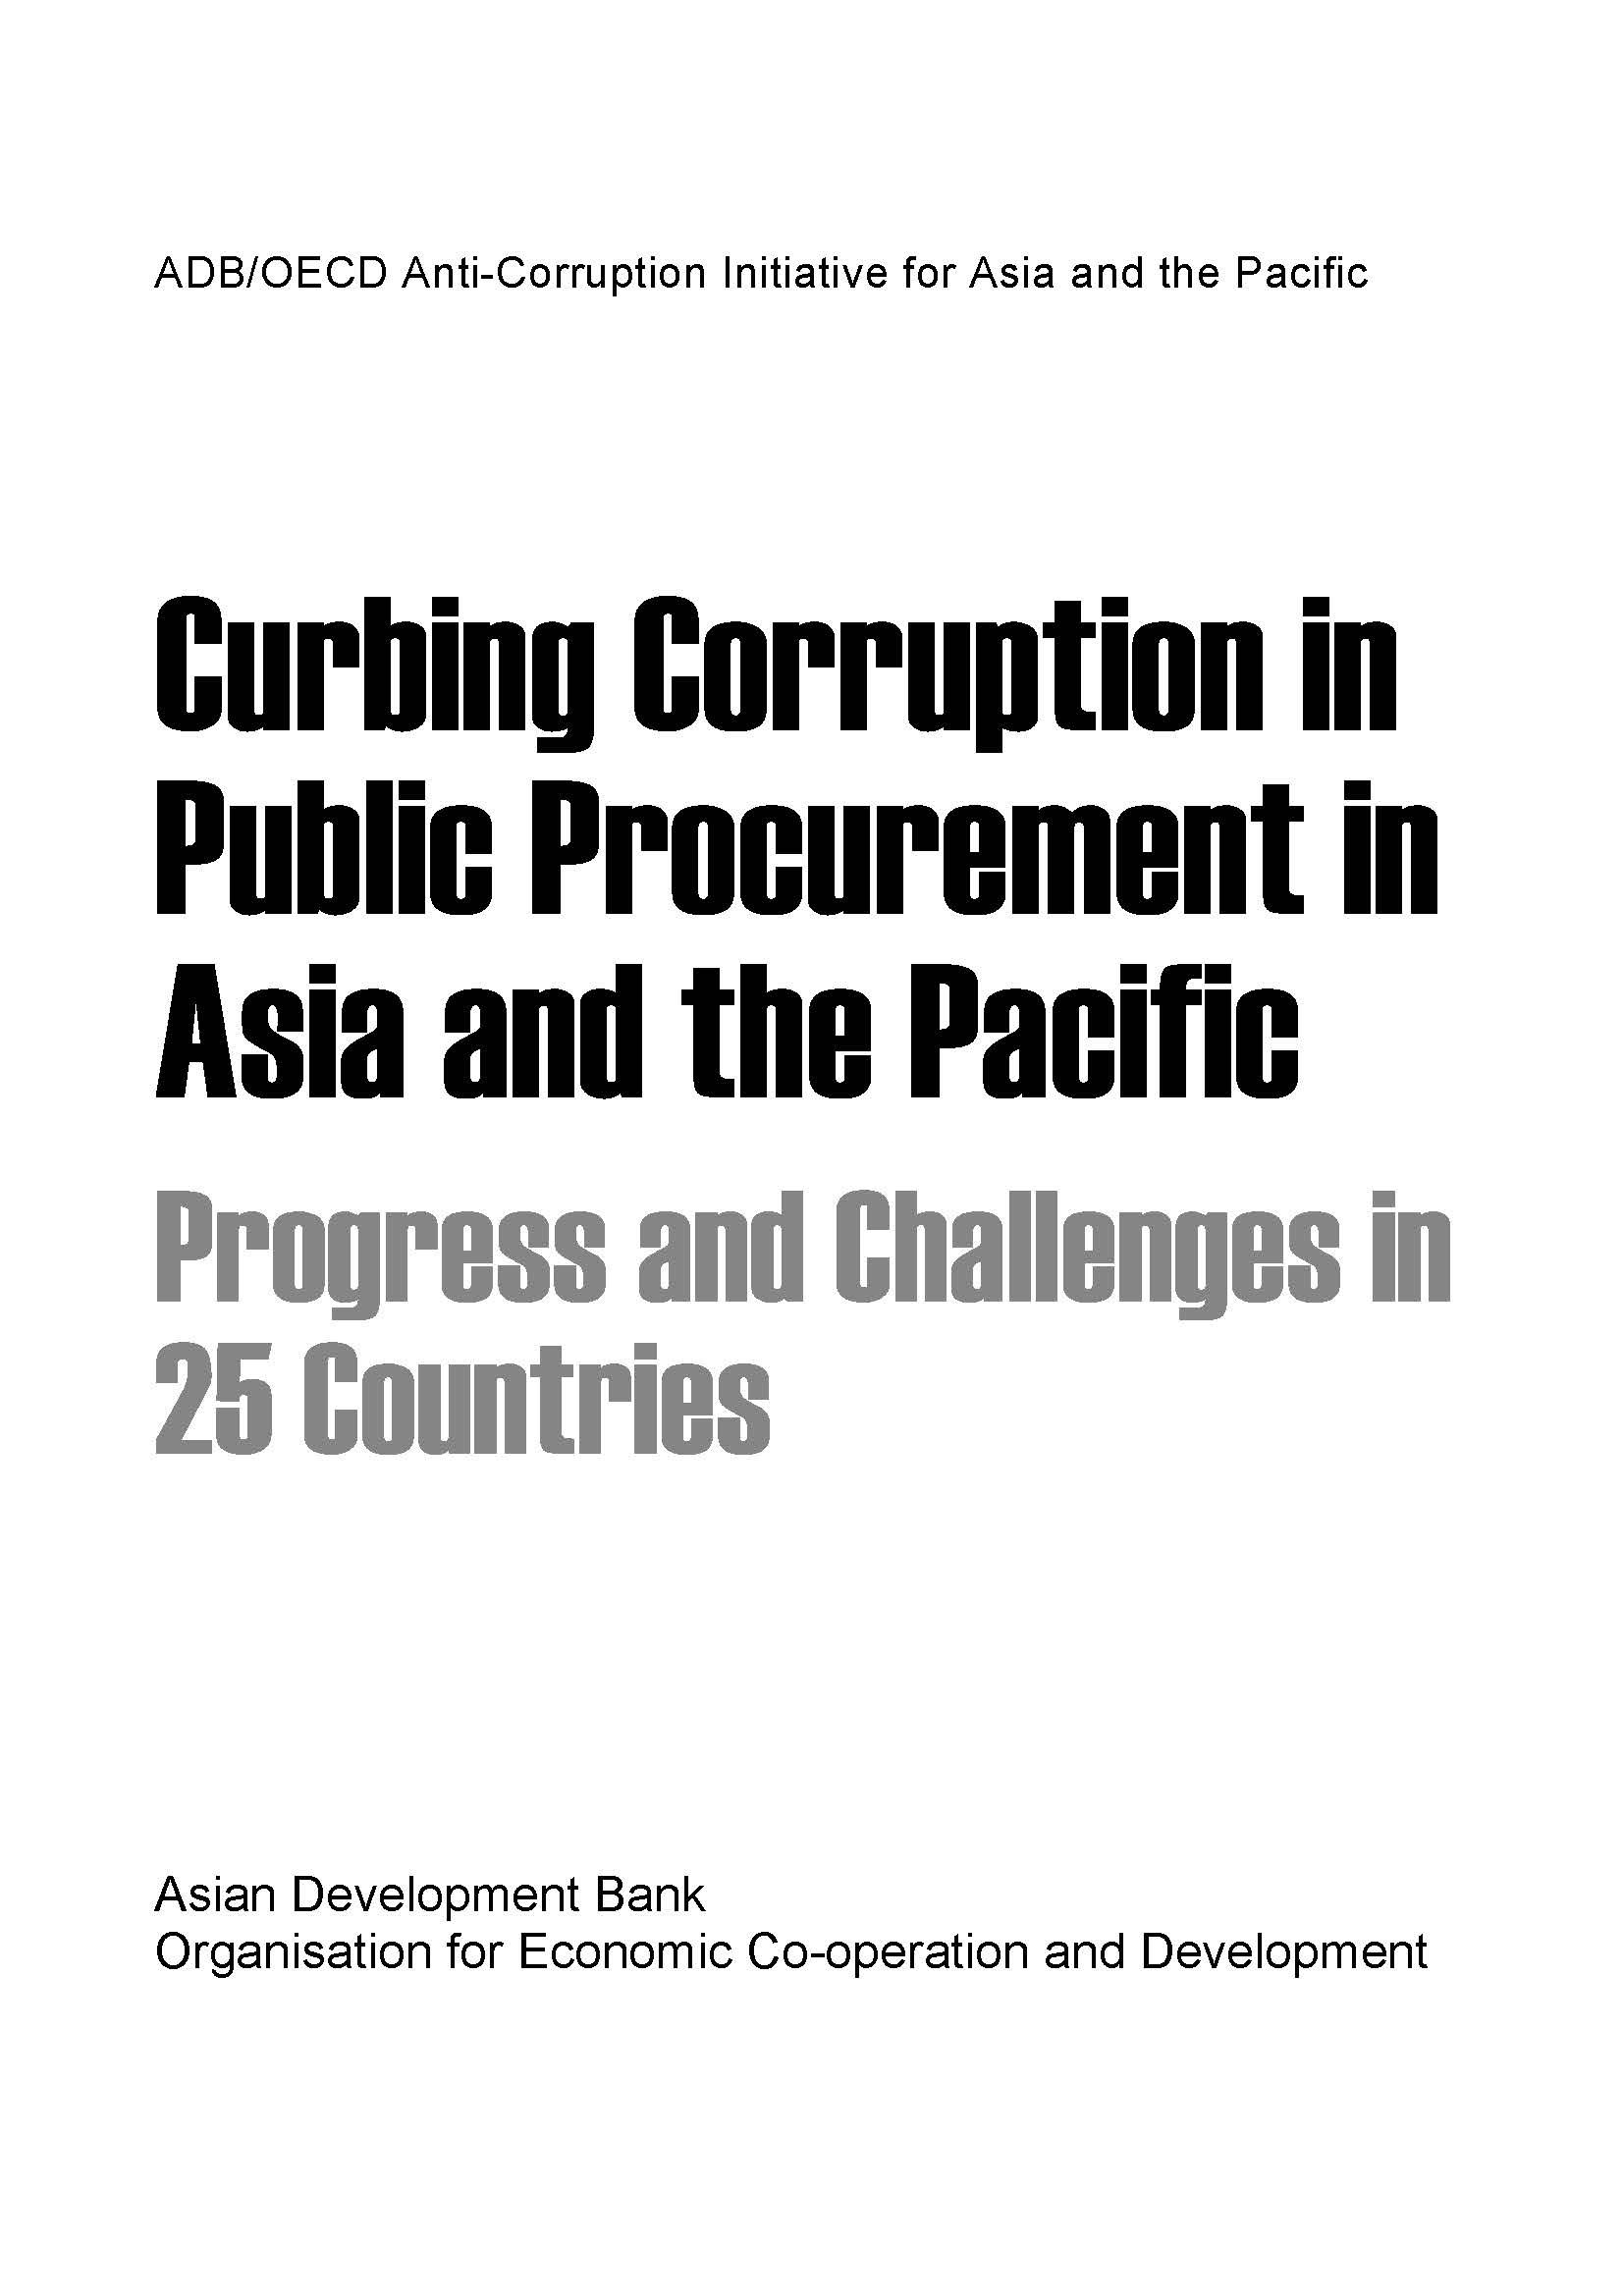 Pages from ADB OECD_Curbing Corruption in Public Procurement in Asia Pacific_2006